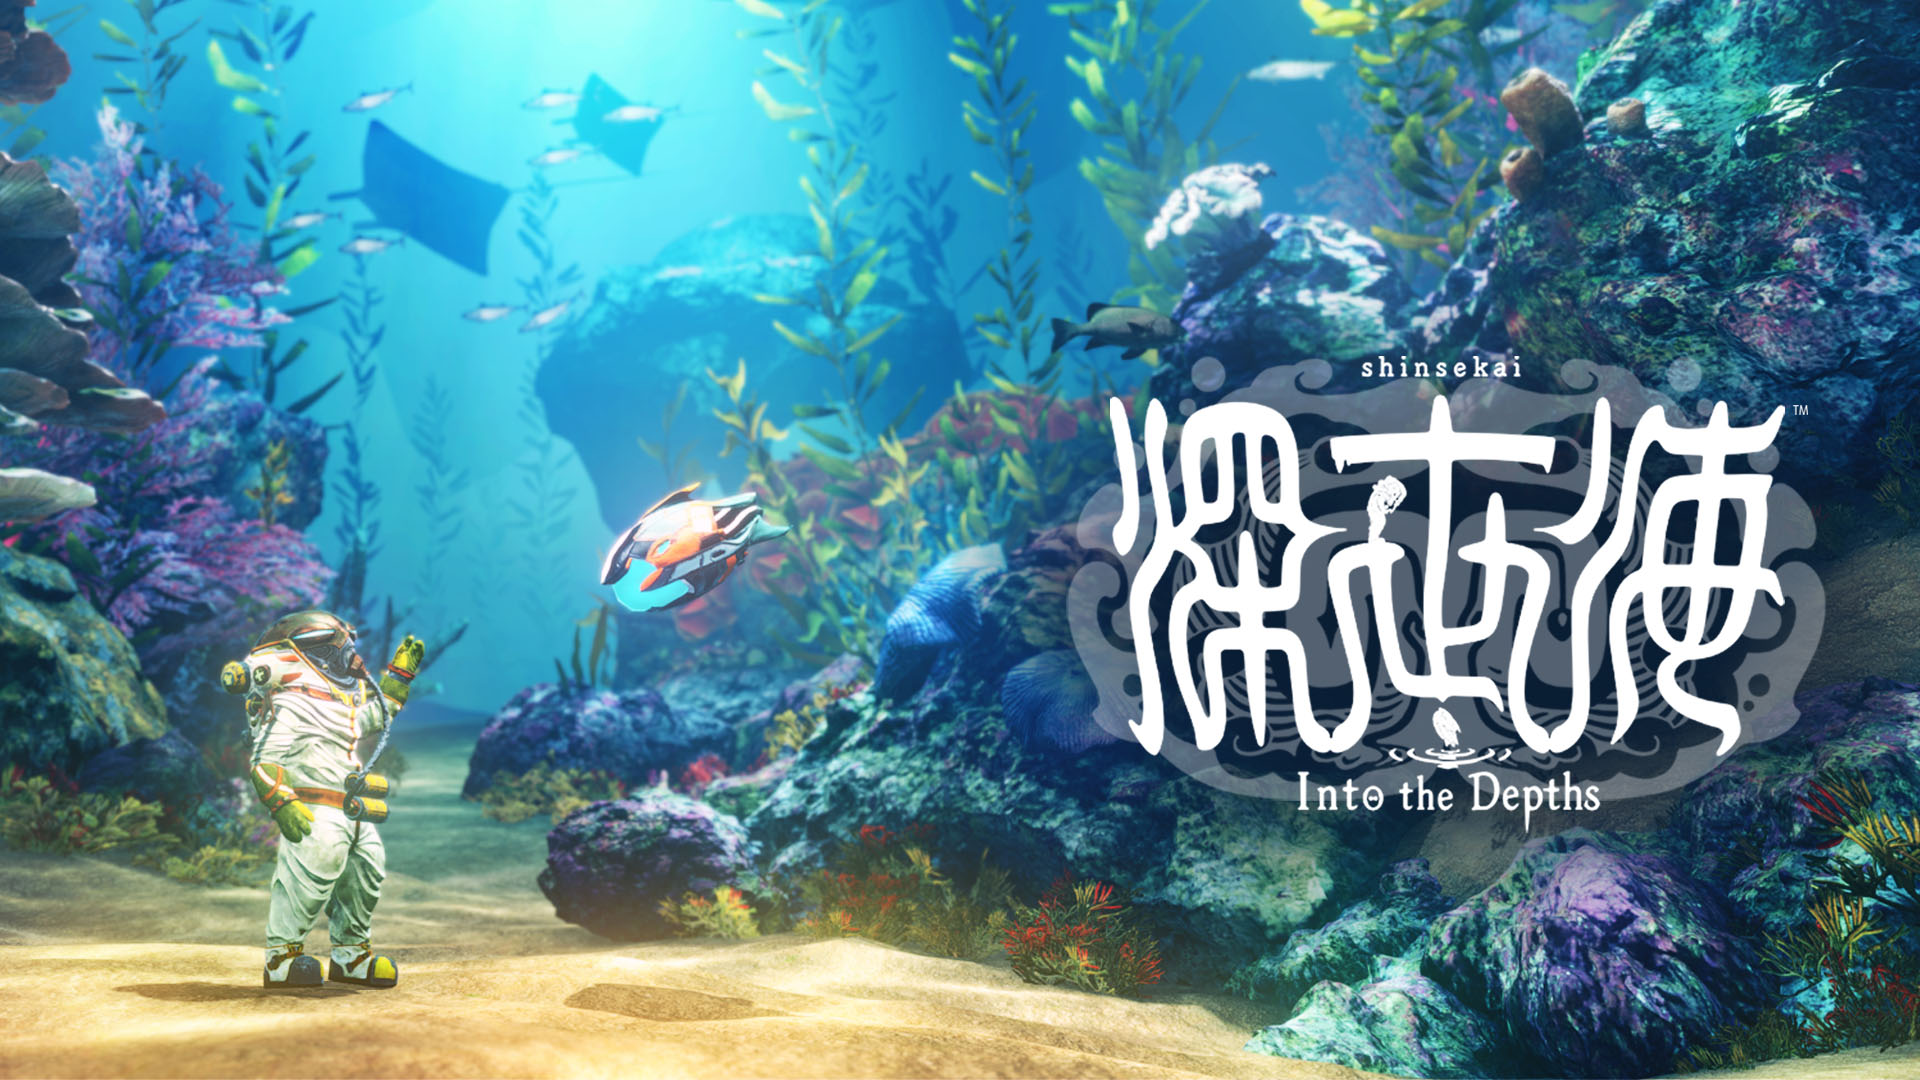 Capcomâ€™s Apple Arcade Deep-Sea Exploration Game Shinsekai: Into the Depths Now Available for Switch